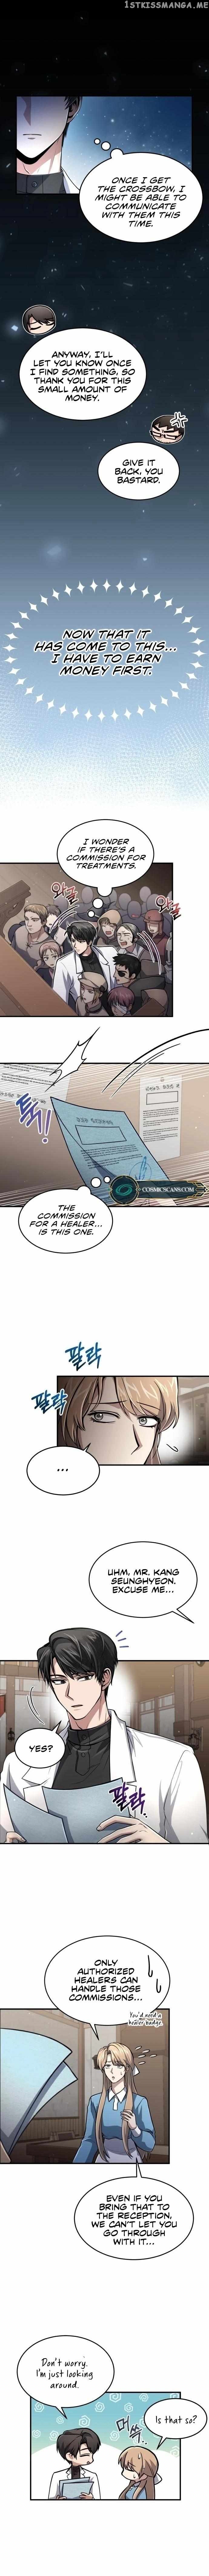 How to Live as a Bootleg Healer Chapter 10 - page 8